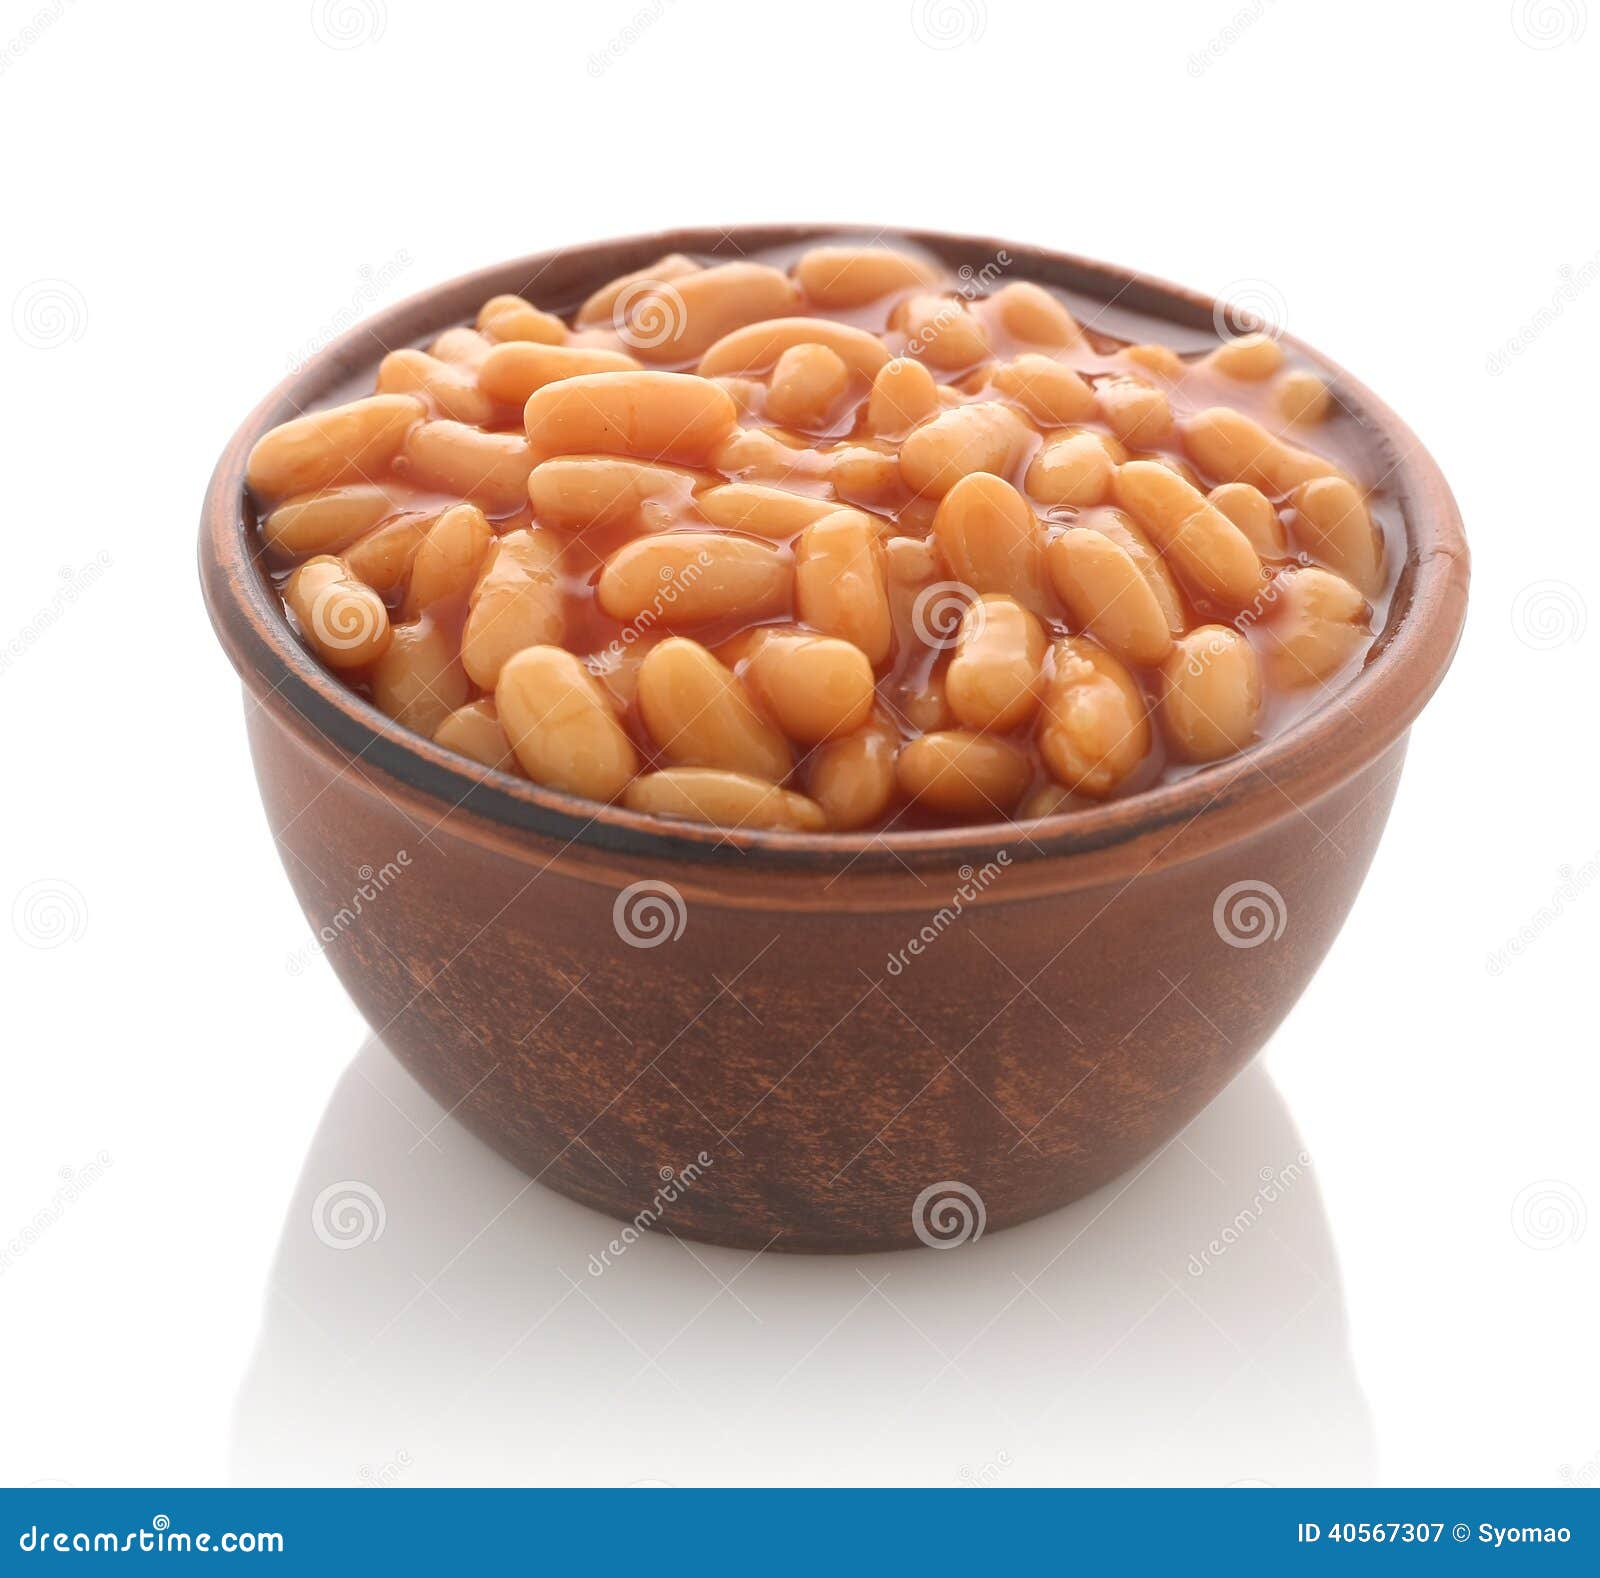 cooked beans with red sauce in a clay bowl